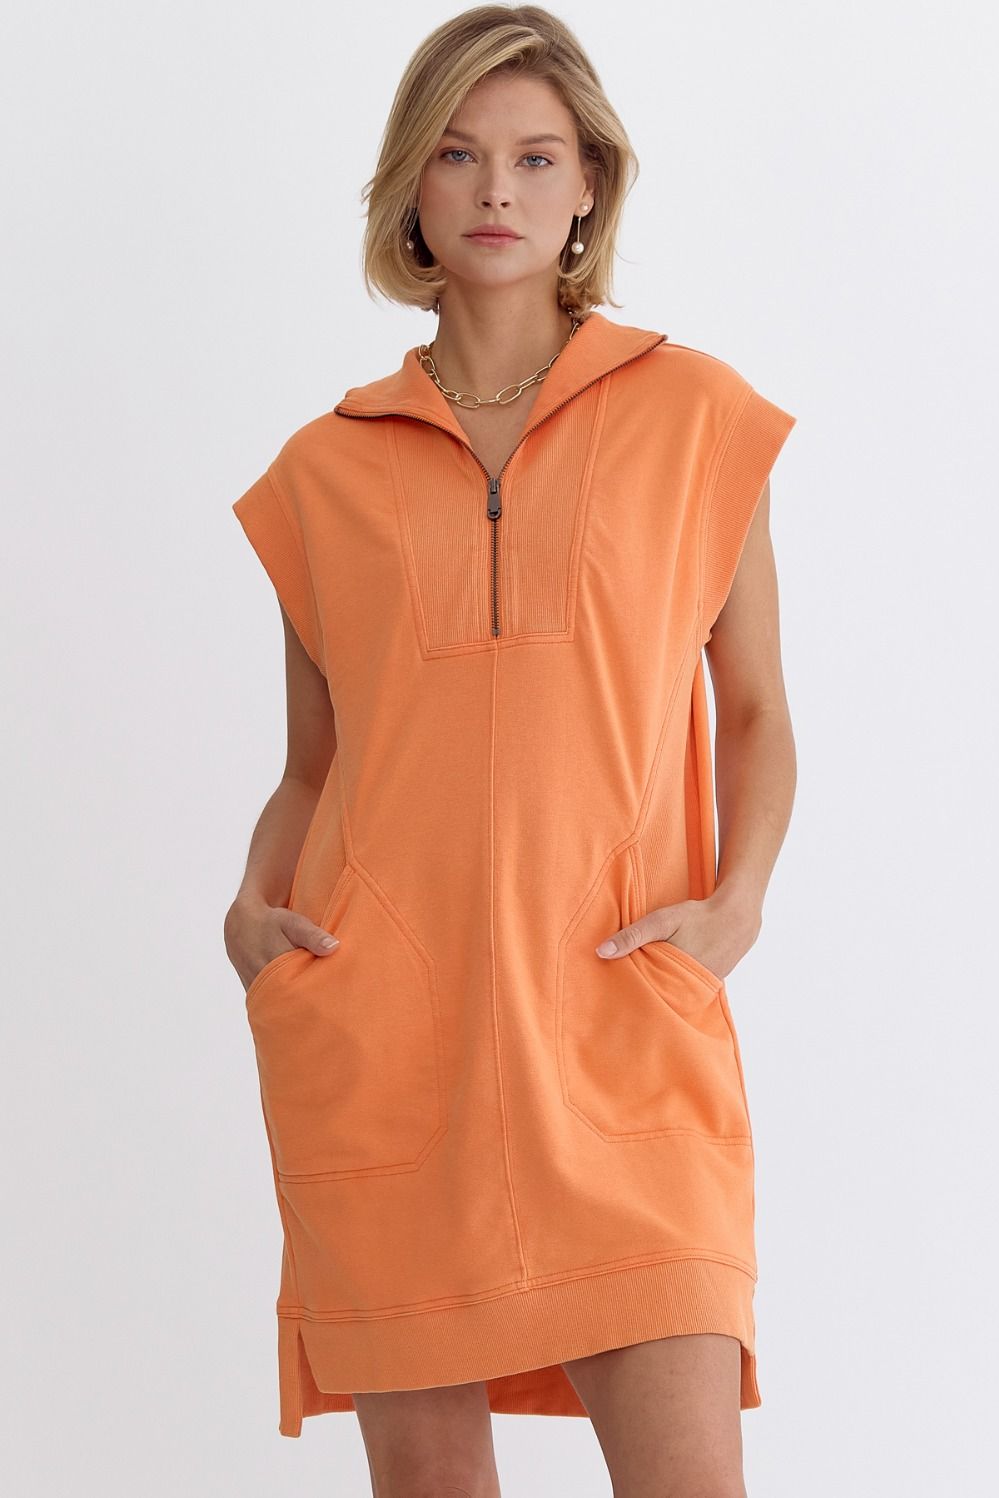 tennessee gameday zip up dress orange - front view